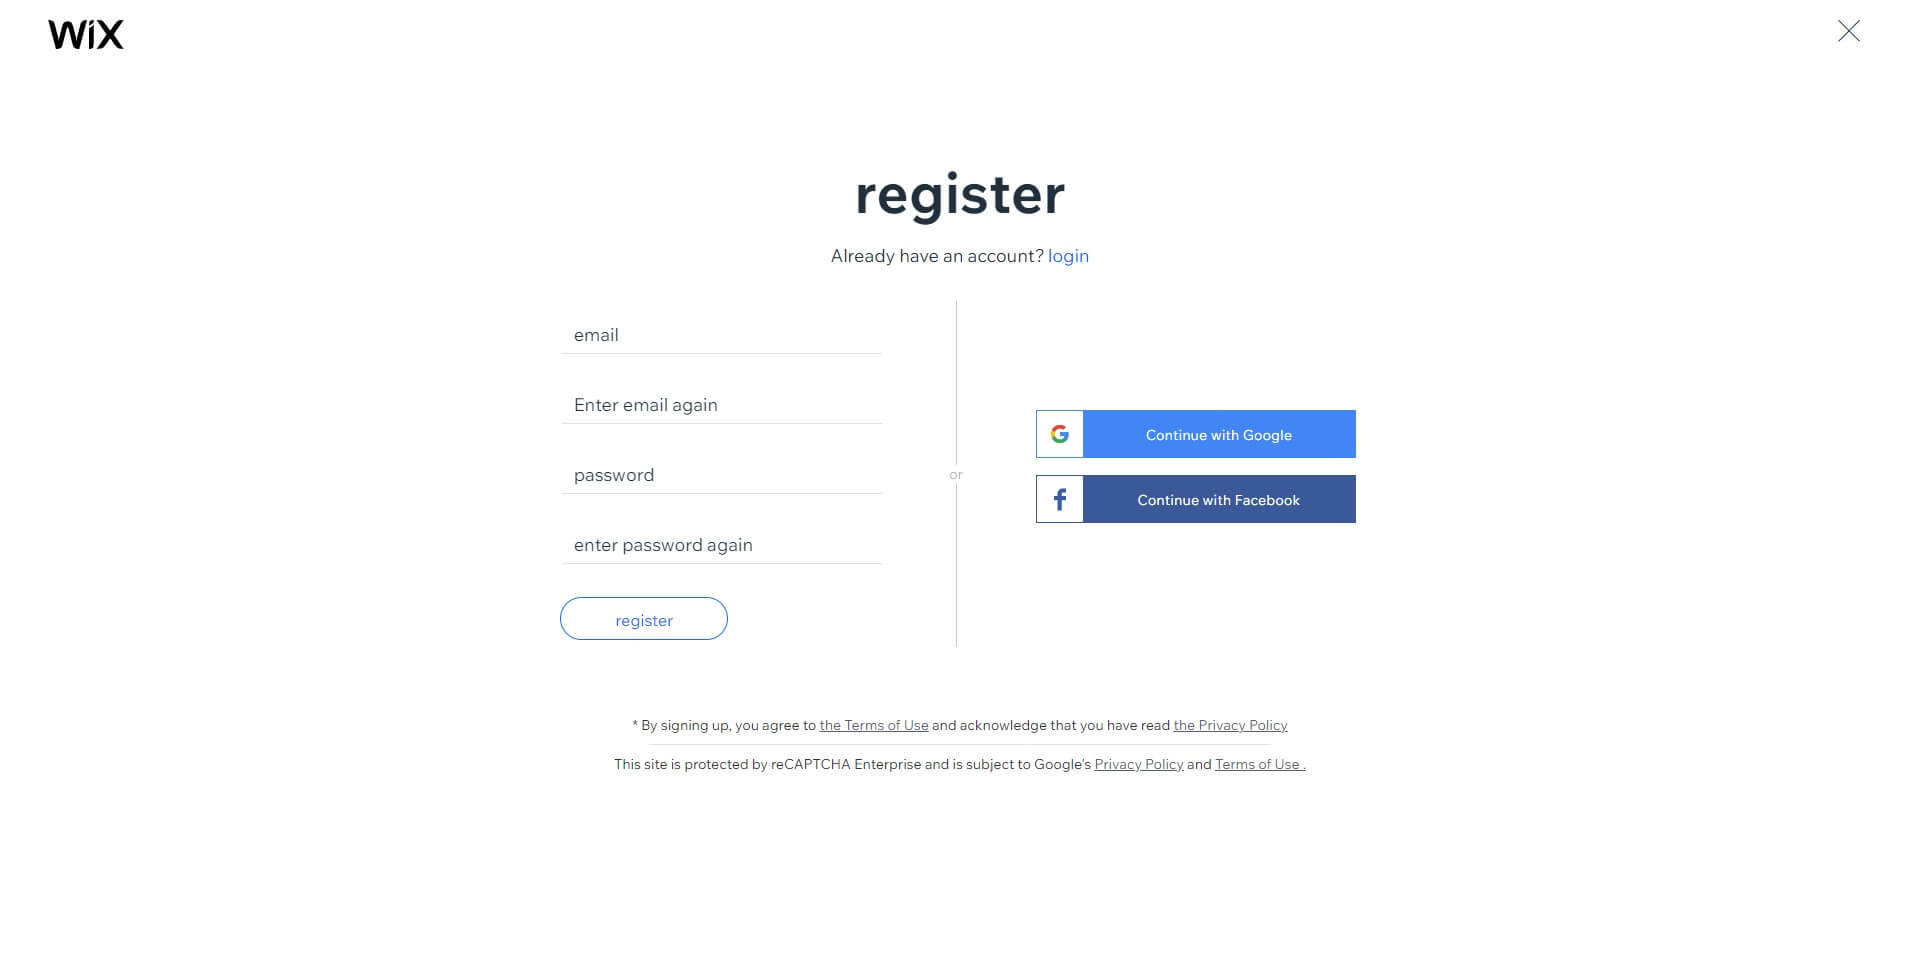 steps to register in Wix